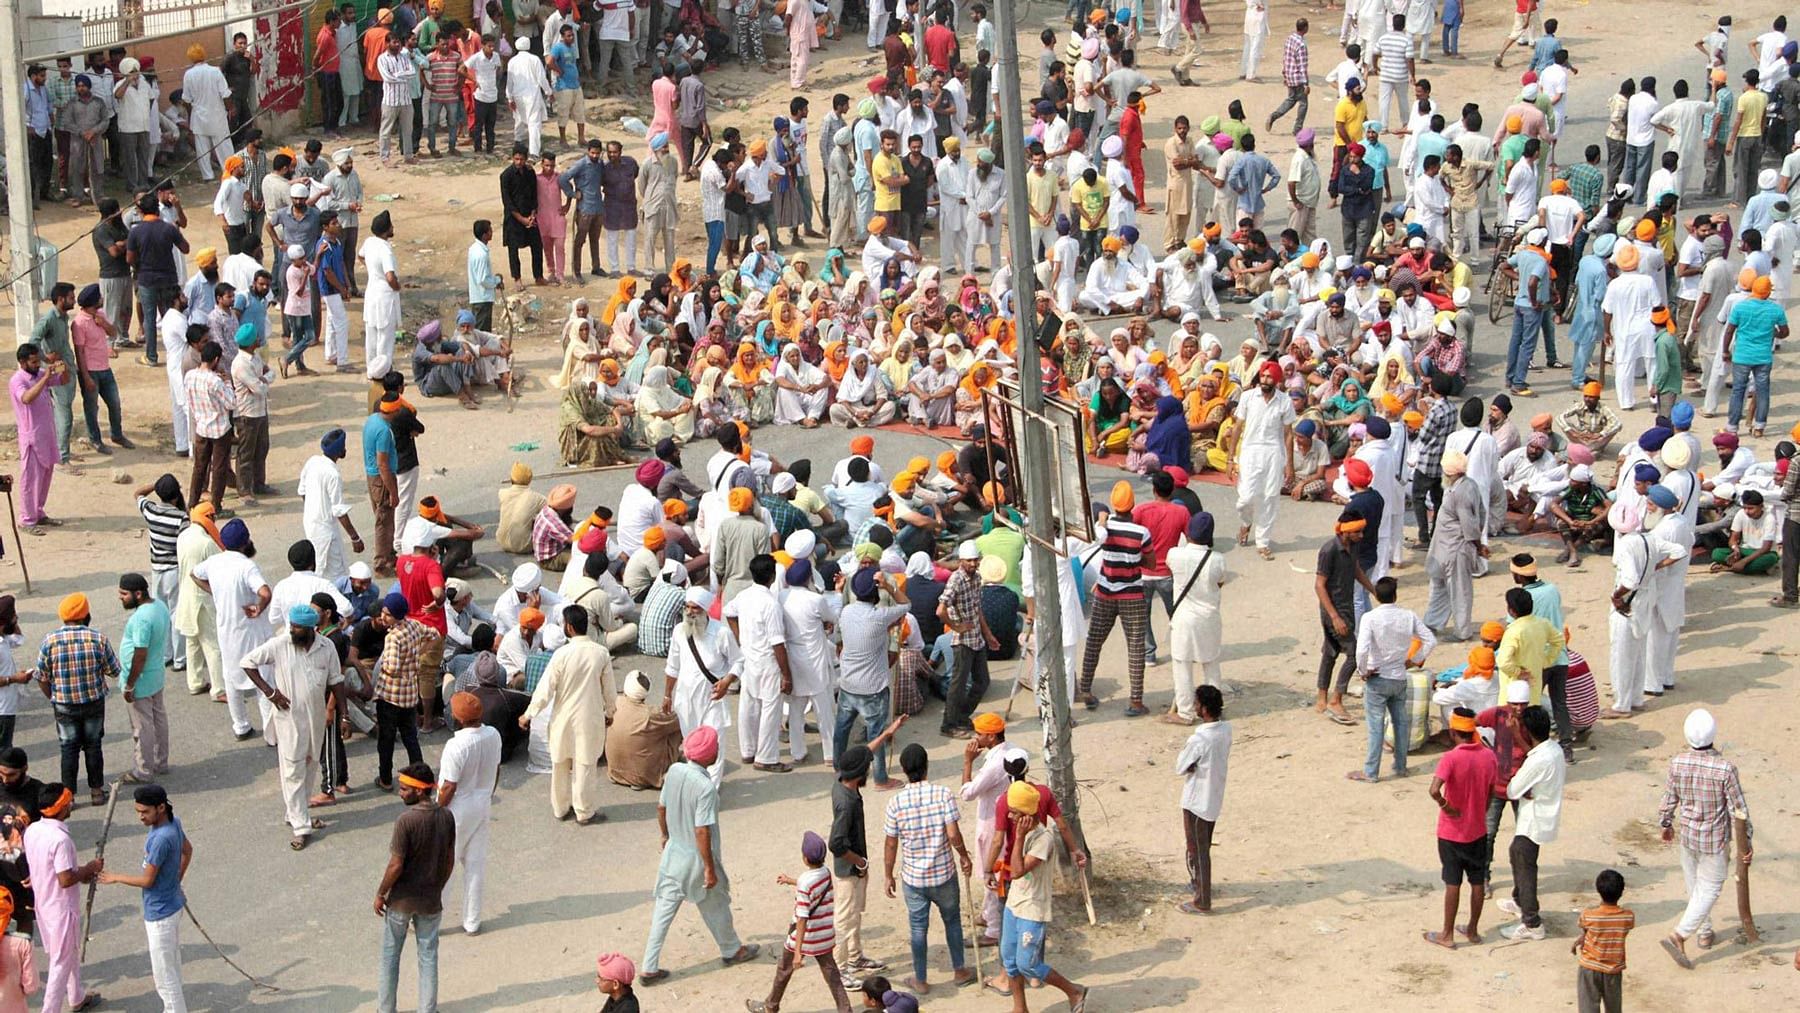 File photo of people gathered in Bathinda, Punjab to protest against the desecration of the holy book. (Photo: PTI)